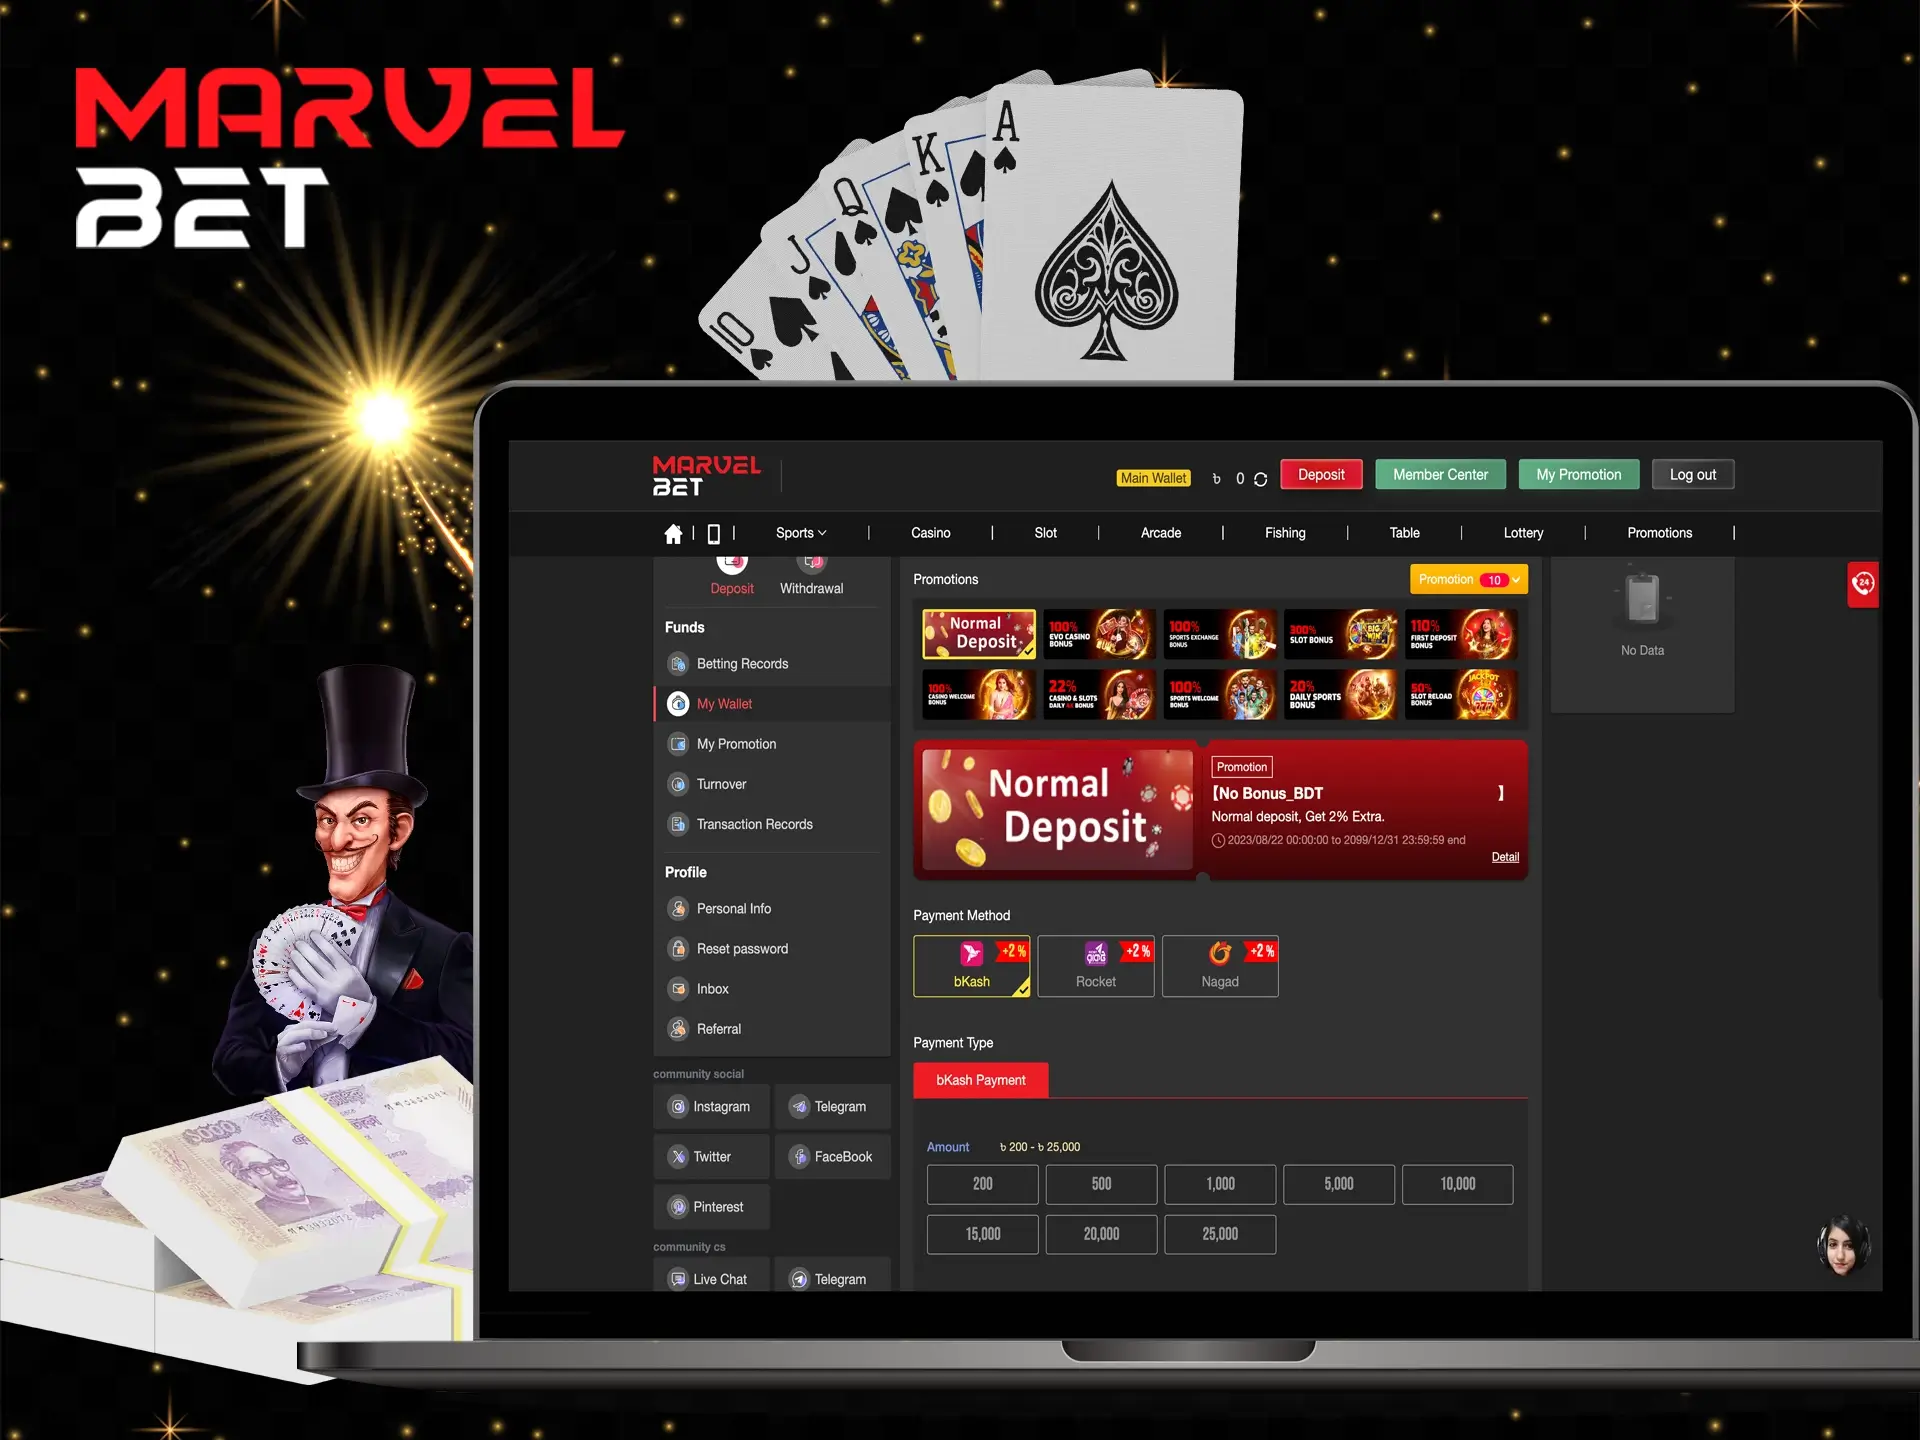 Marvelbet represents quality service and a responsible approach to their business, which is why they are loved by a large number of casino users.